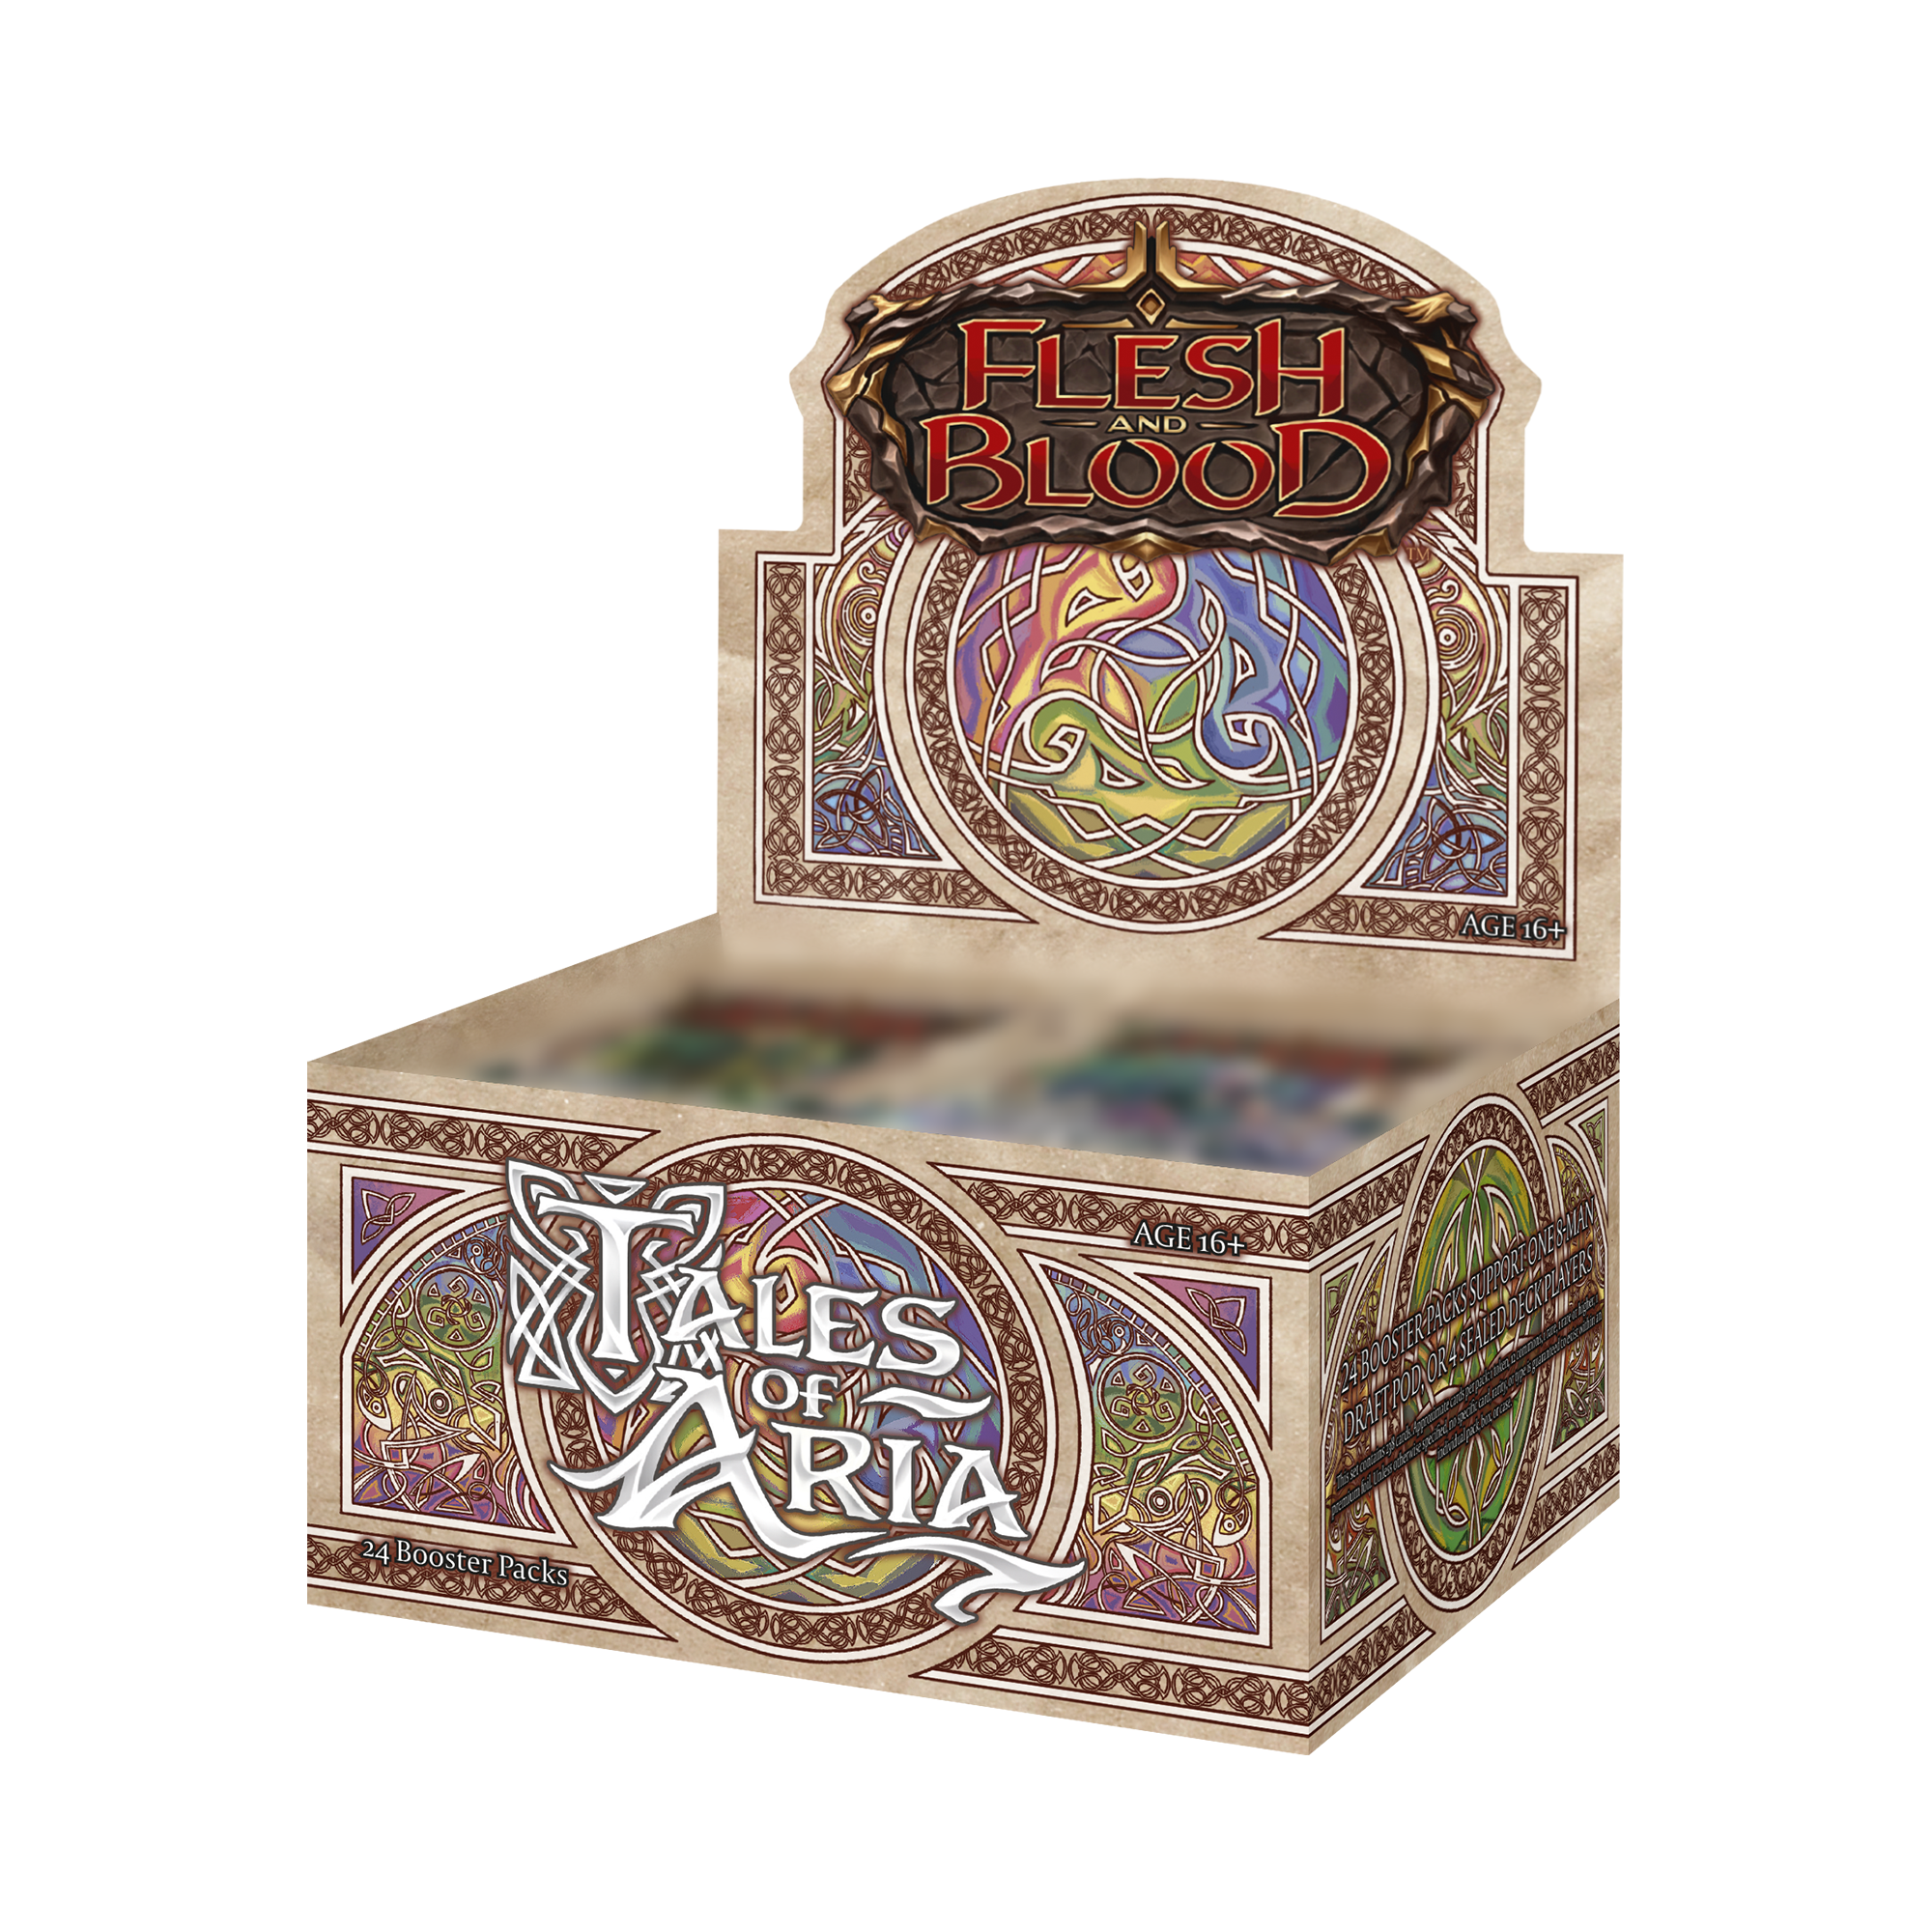 Flesh and b lood Tales of Aria | Dumpster Cat Games